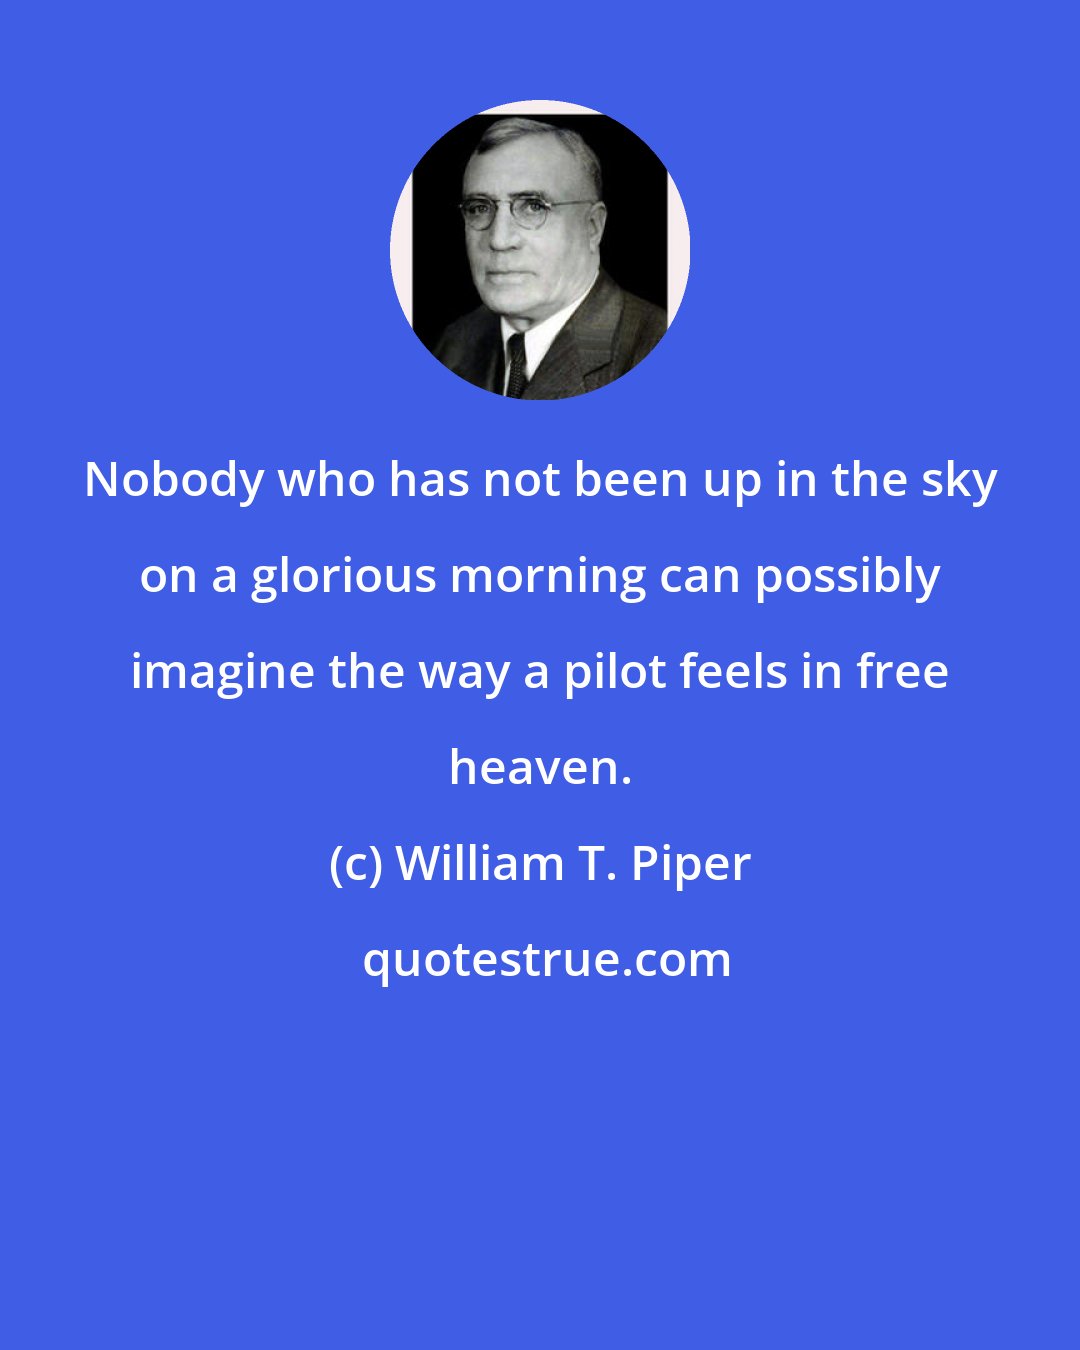 William T. Piper: Nobody who has not been up in the sky on a glorious morning can possibly imagine the way a pilot feels in free heaven.